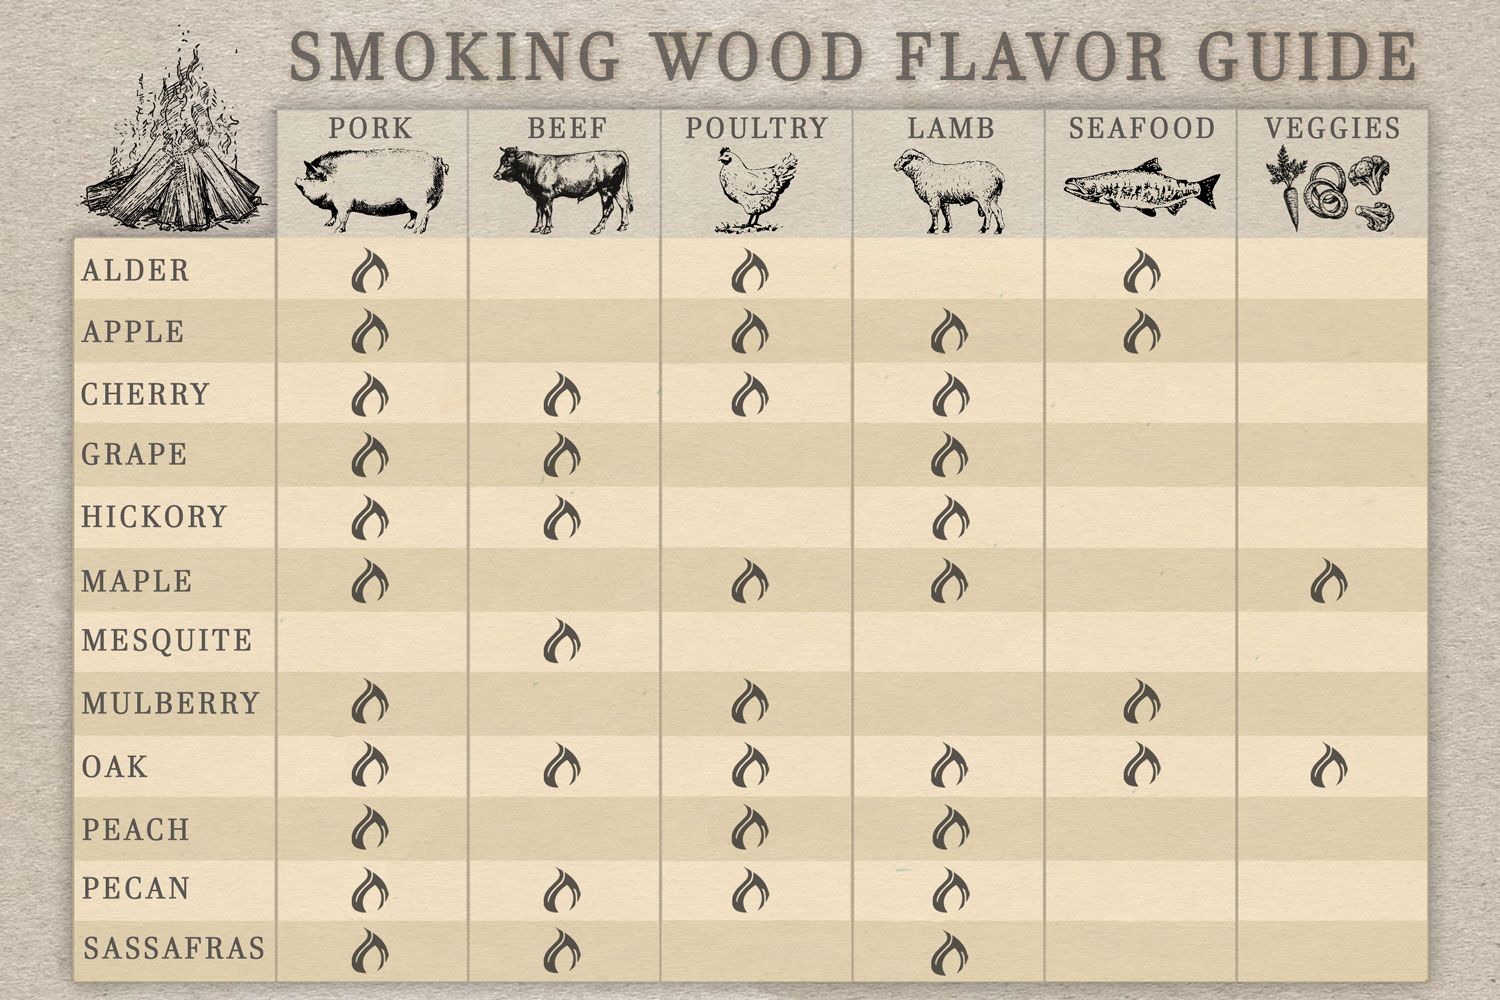 How To Choose The Best Smoking Wood For Your Next BBQ.